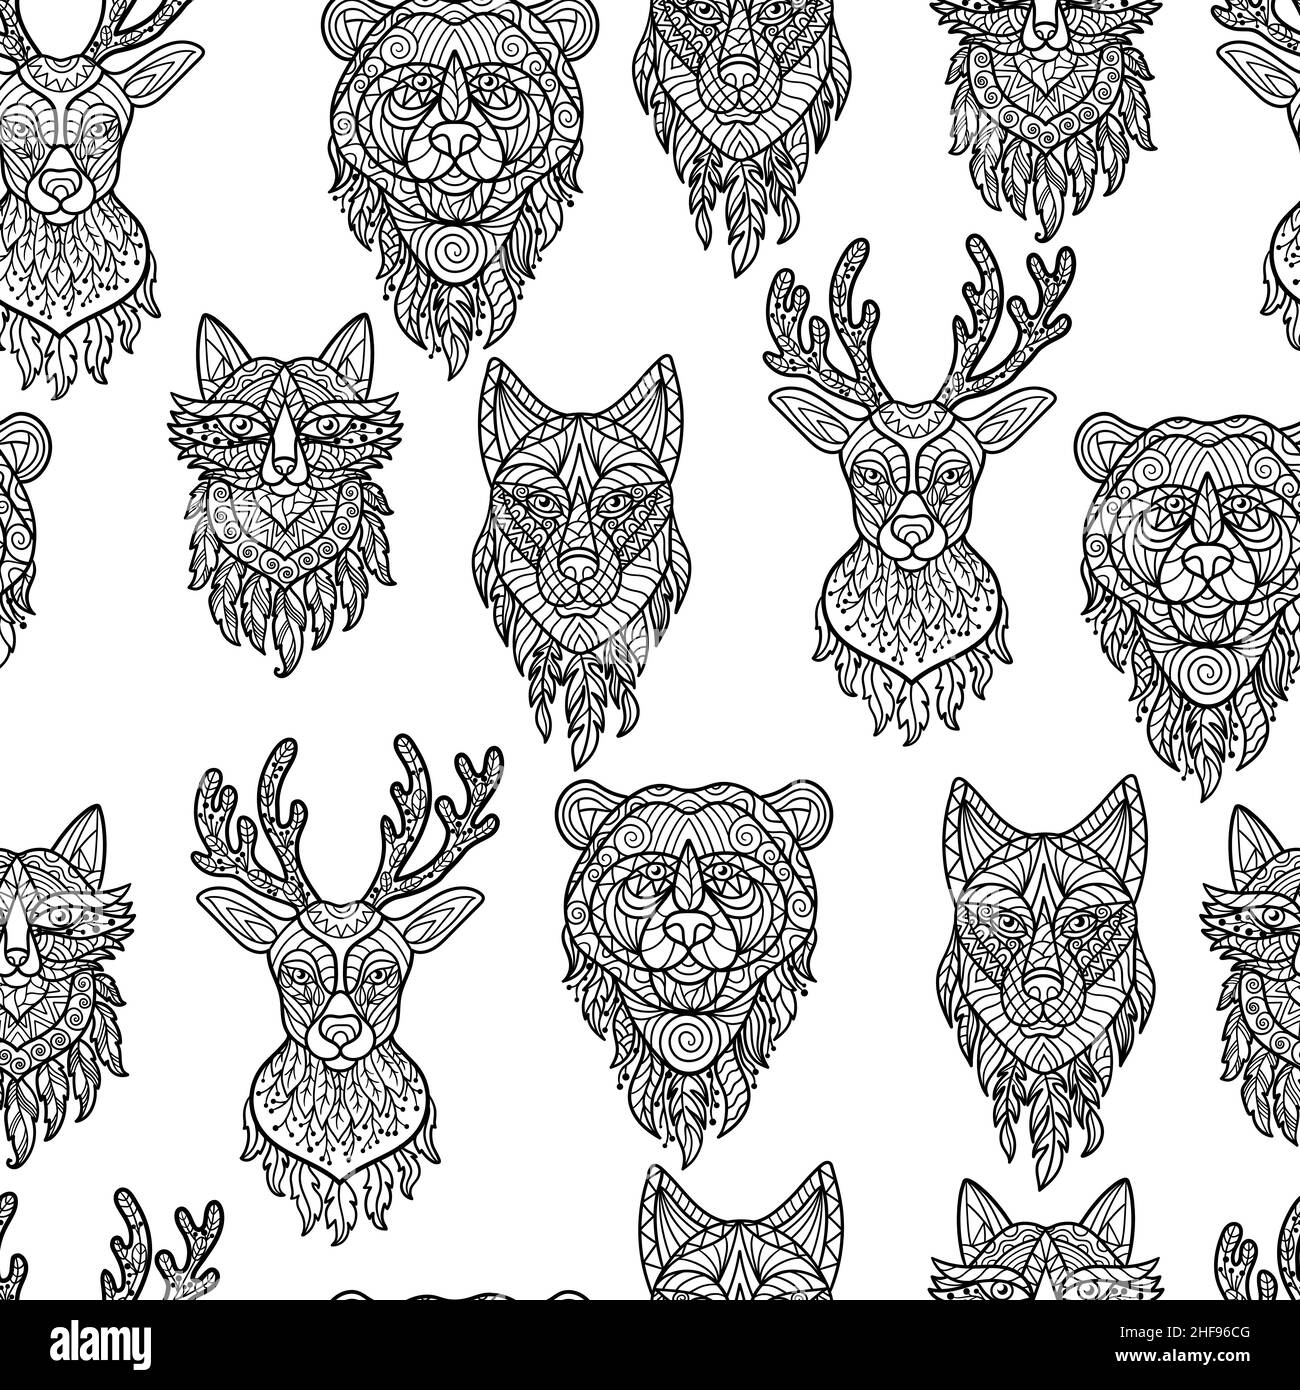 Vector seamless pattern. Coloring page with abstract forest animals: bear, wolf, fox, deer with patterns in ethnic style, zen art Stock Vector